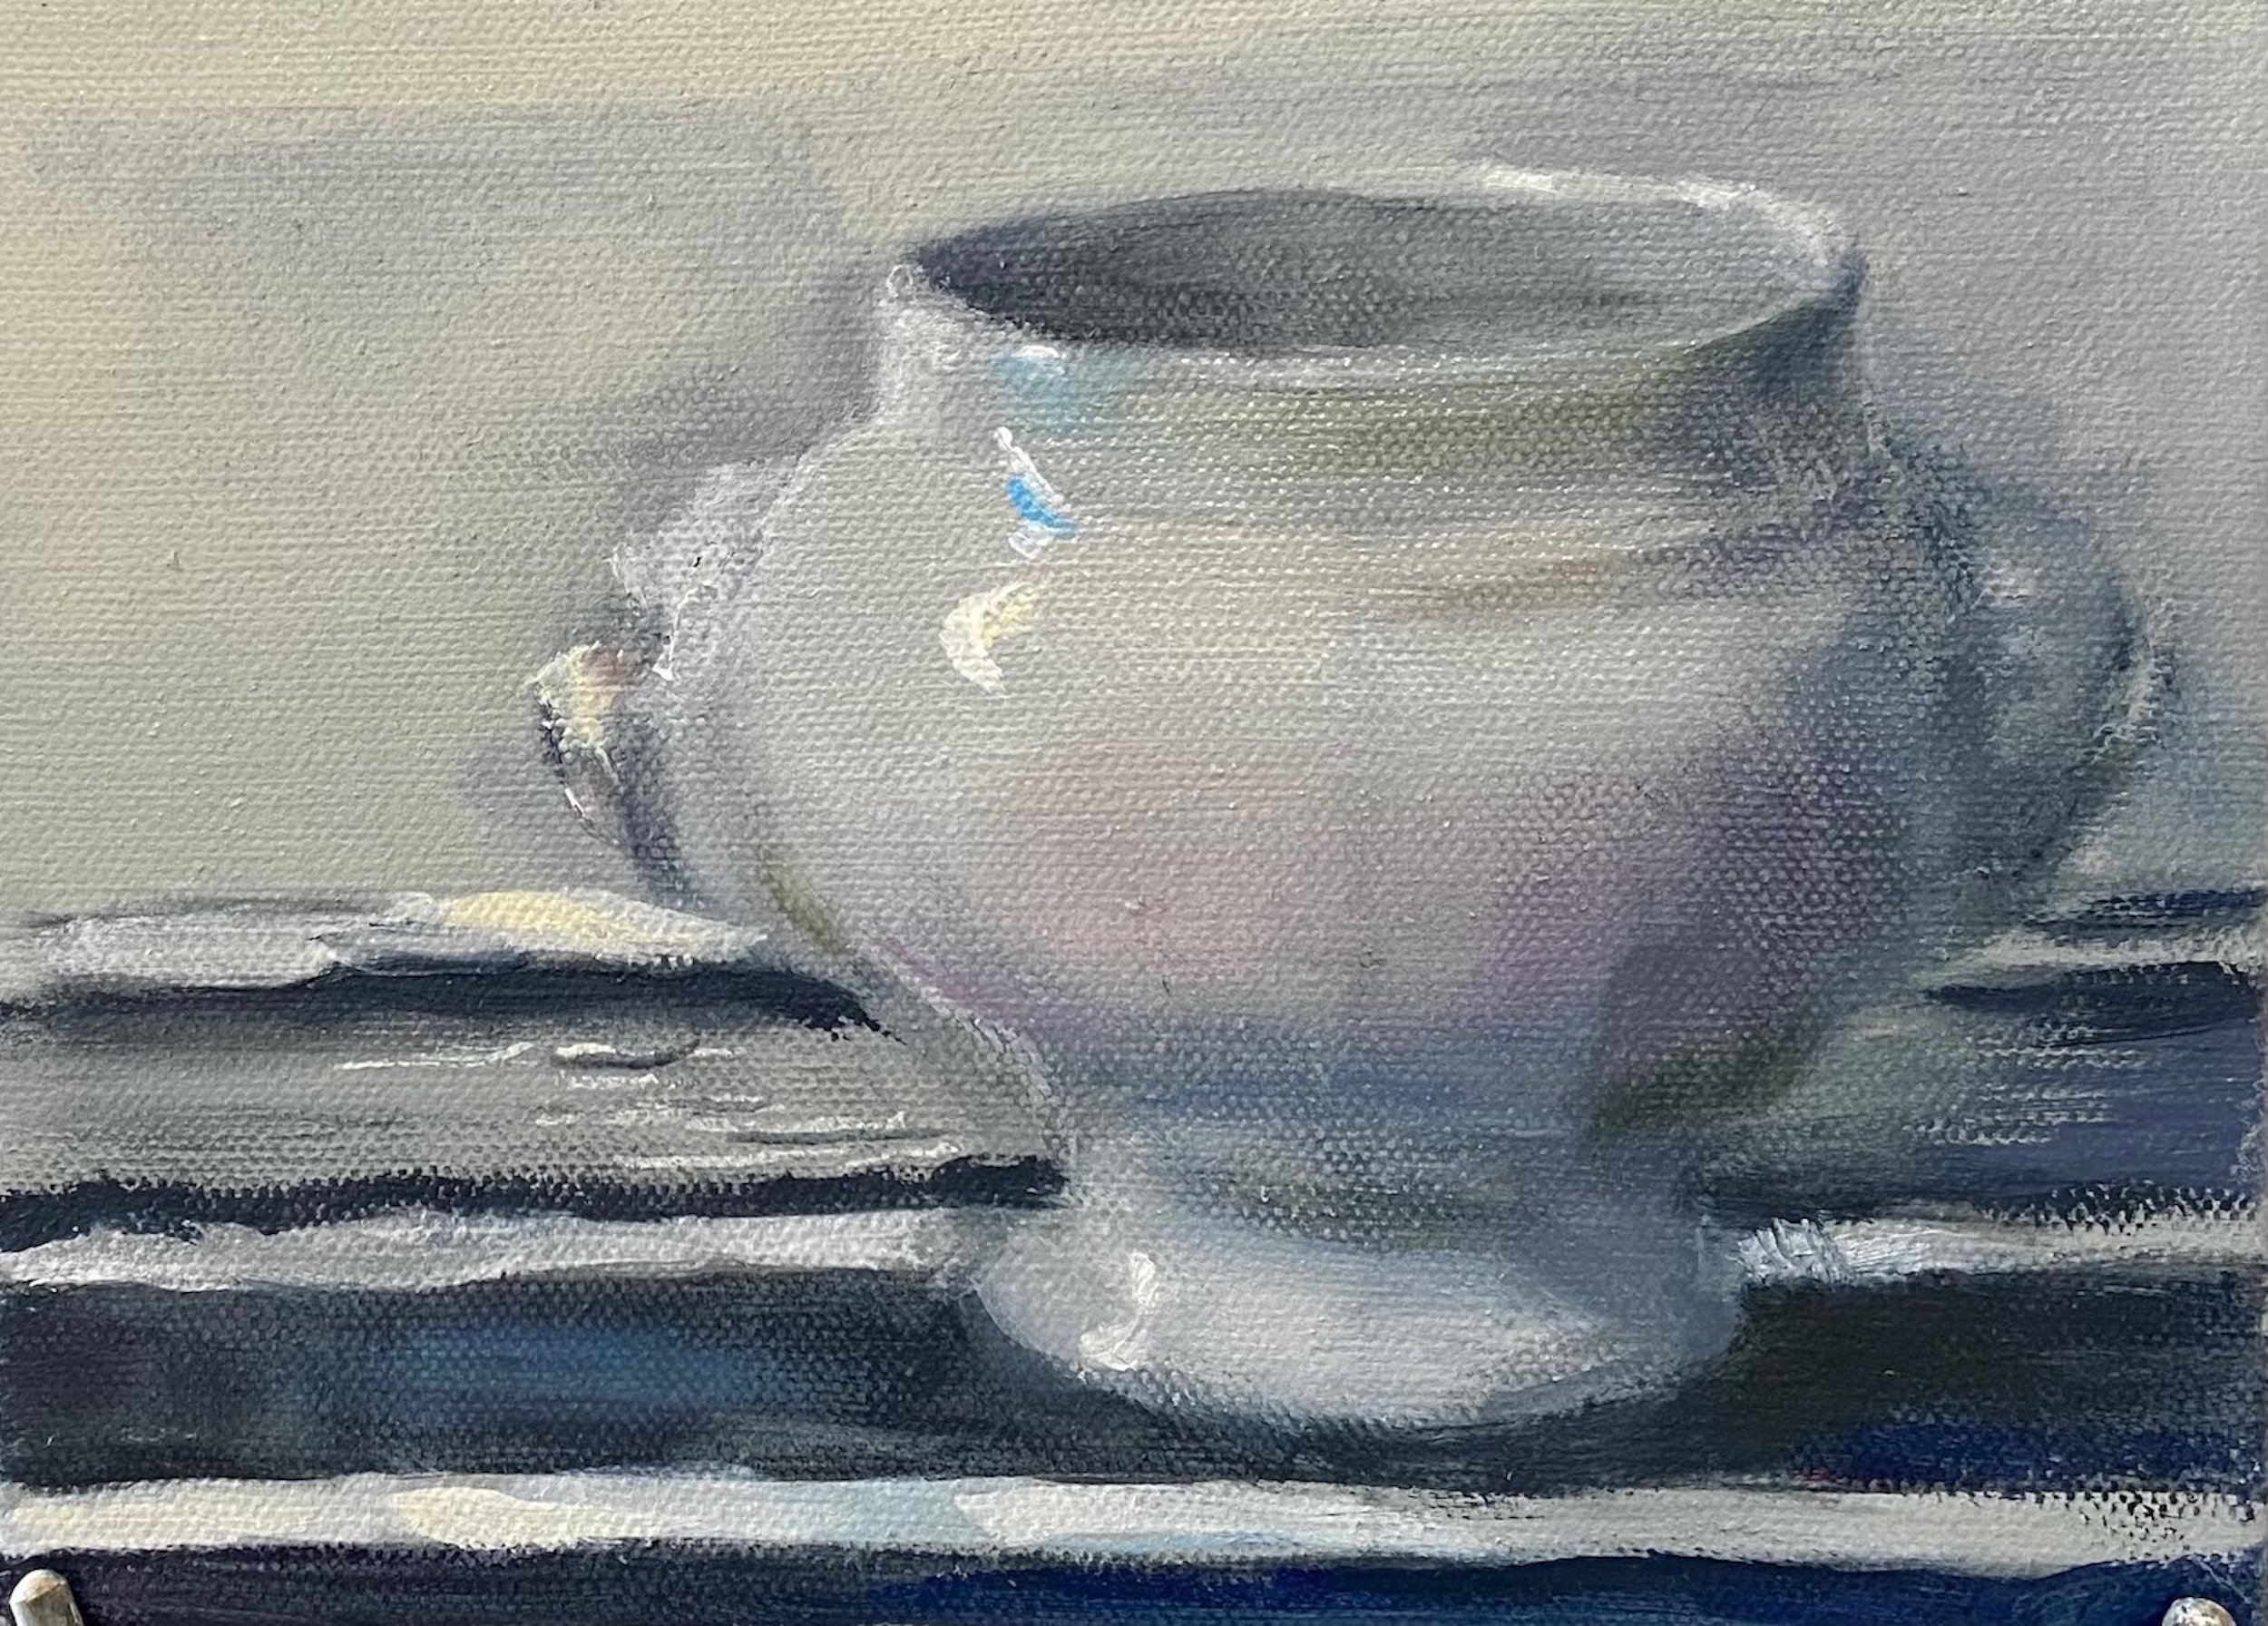 French Bowl for Latte, Oil on canvas, 6" x 8" 2021